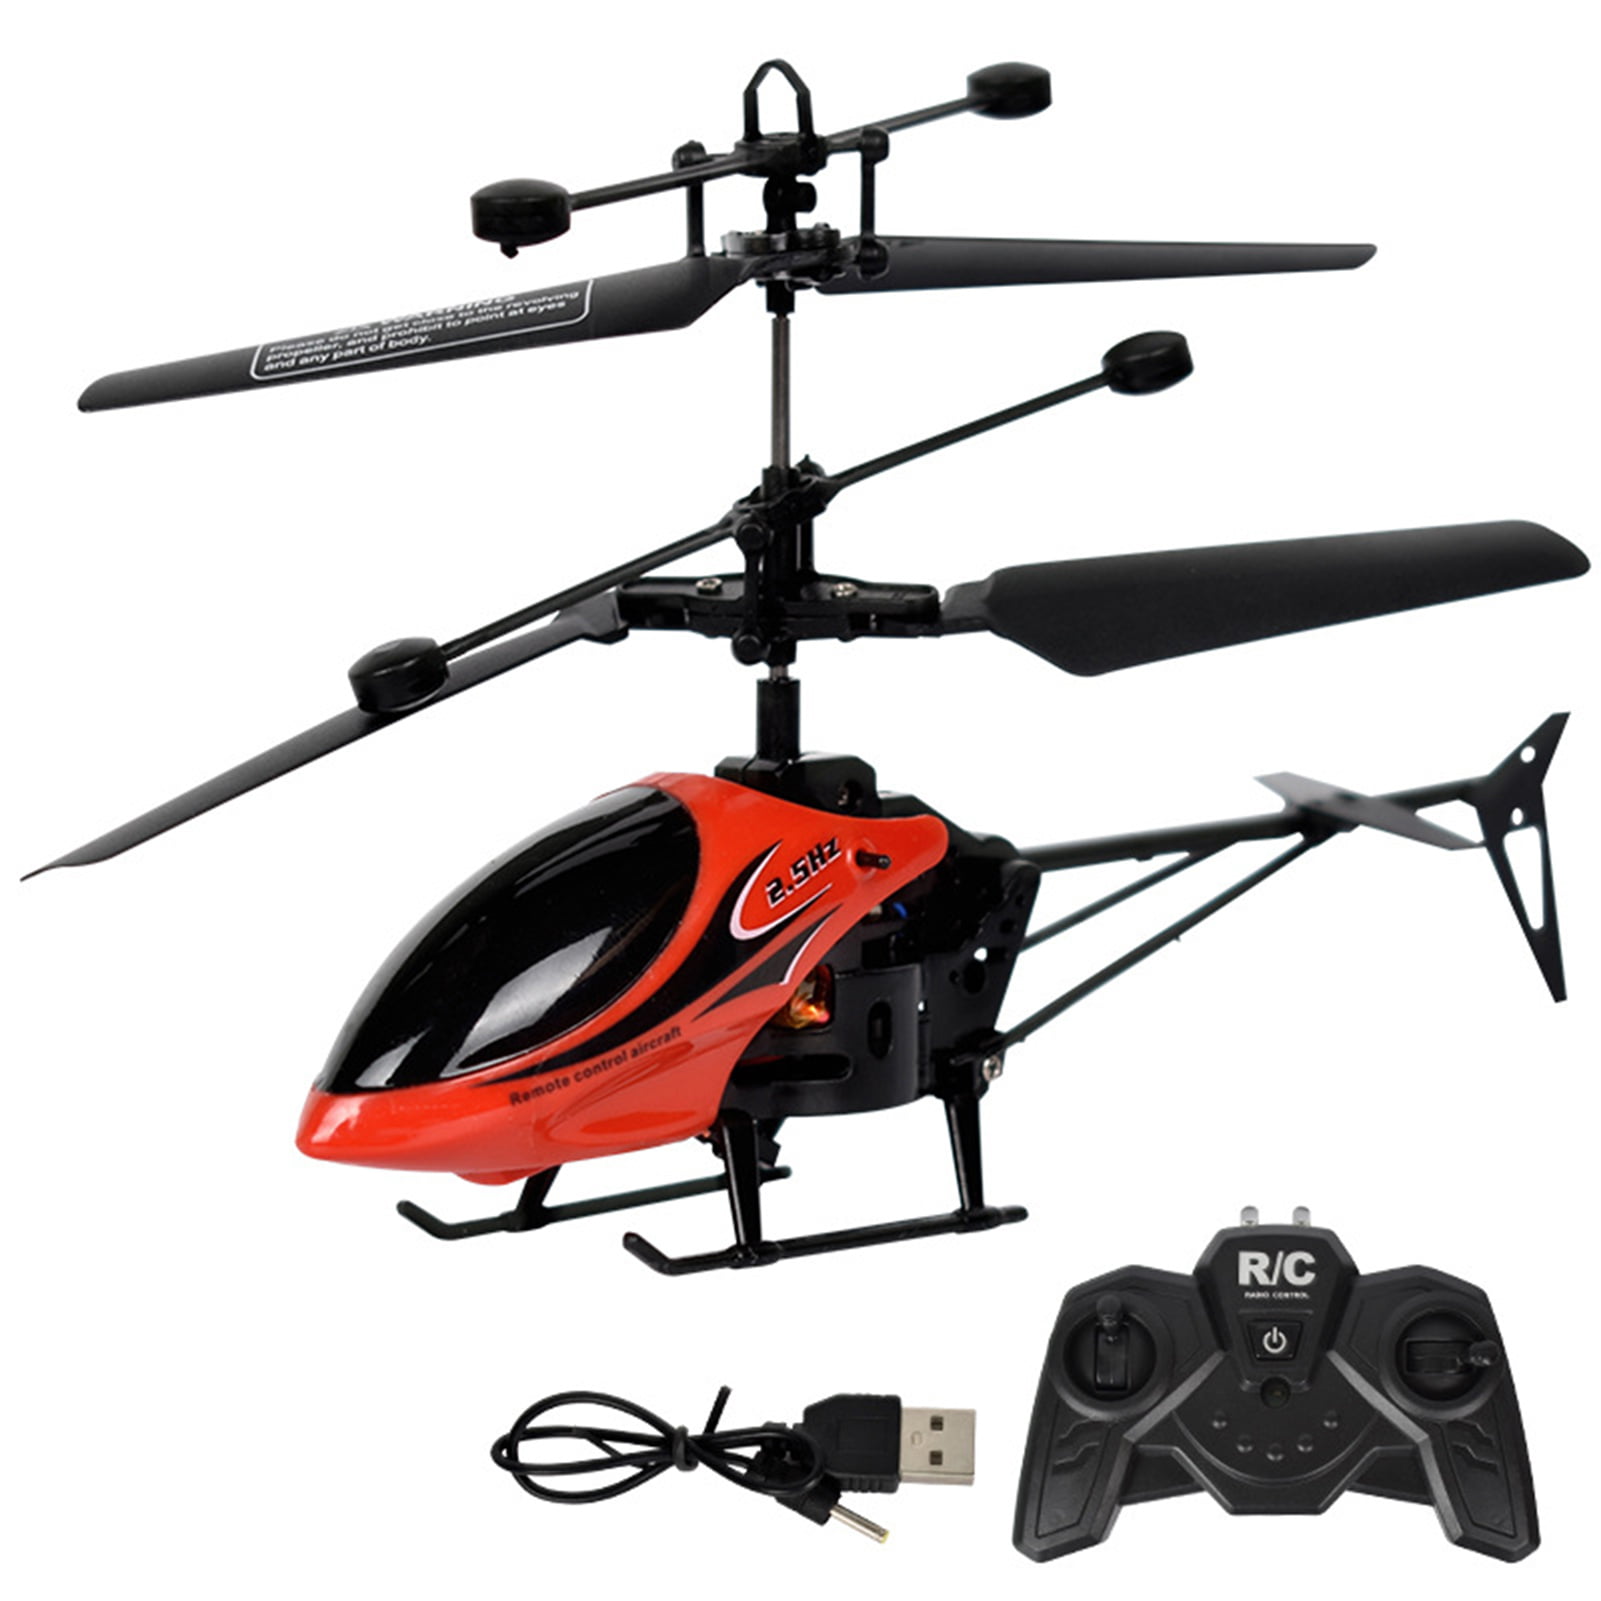 RC Helicopter Airplane 2CH with LED Lights USB Charge Kids Boys Fun Toy Gift